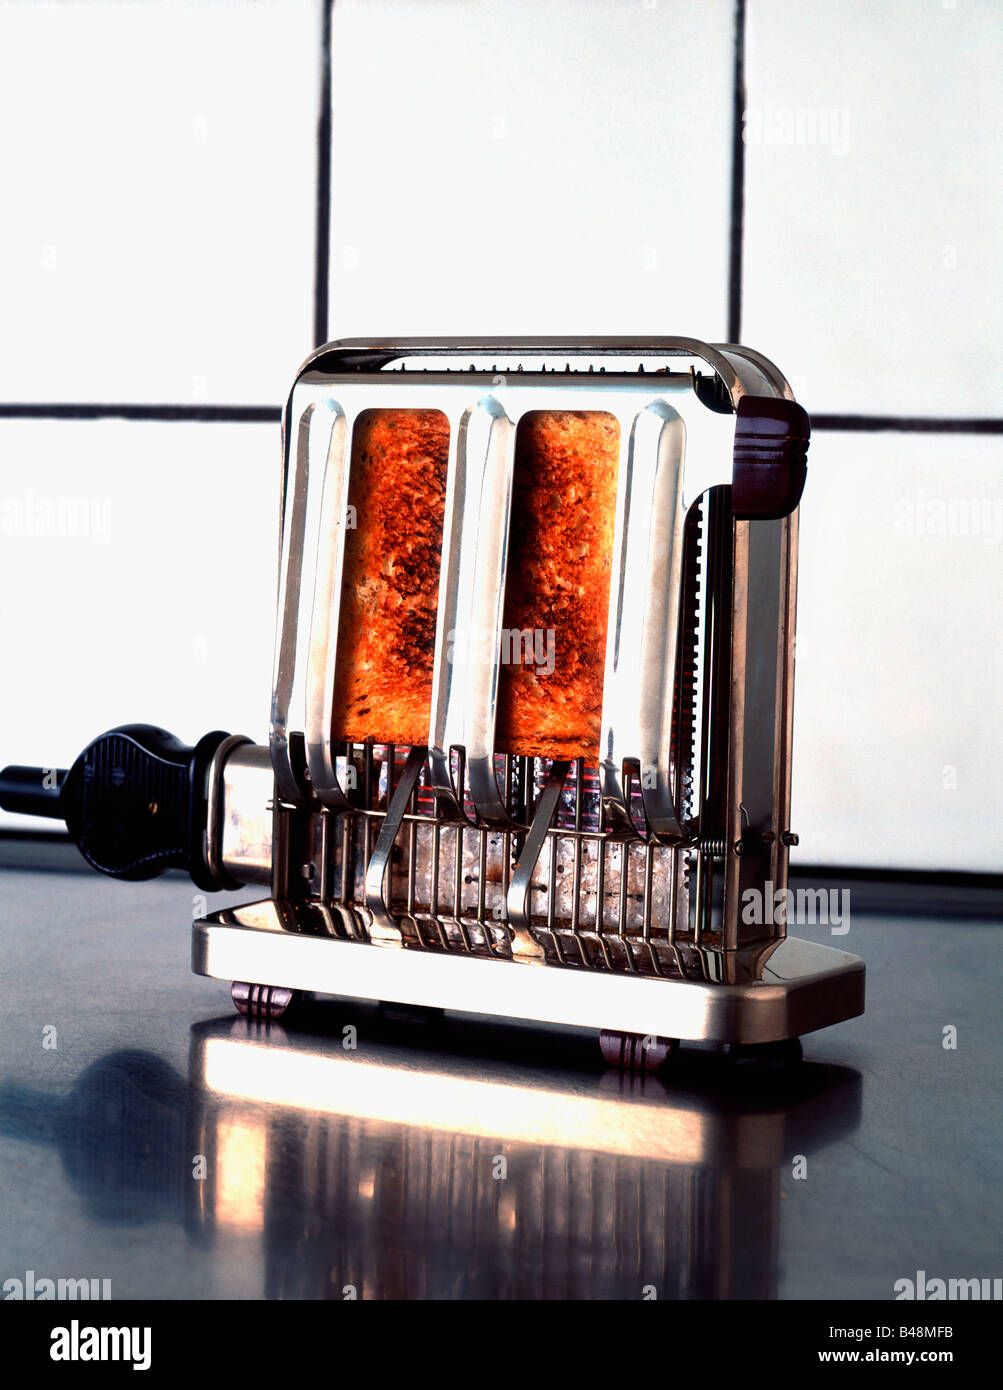 Dualit toaster hi-res stock photography and images - Alamy